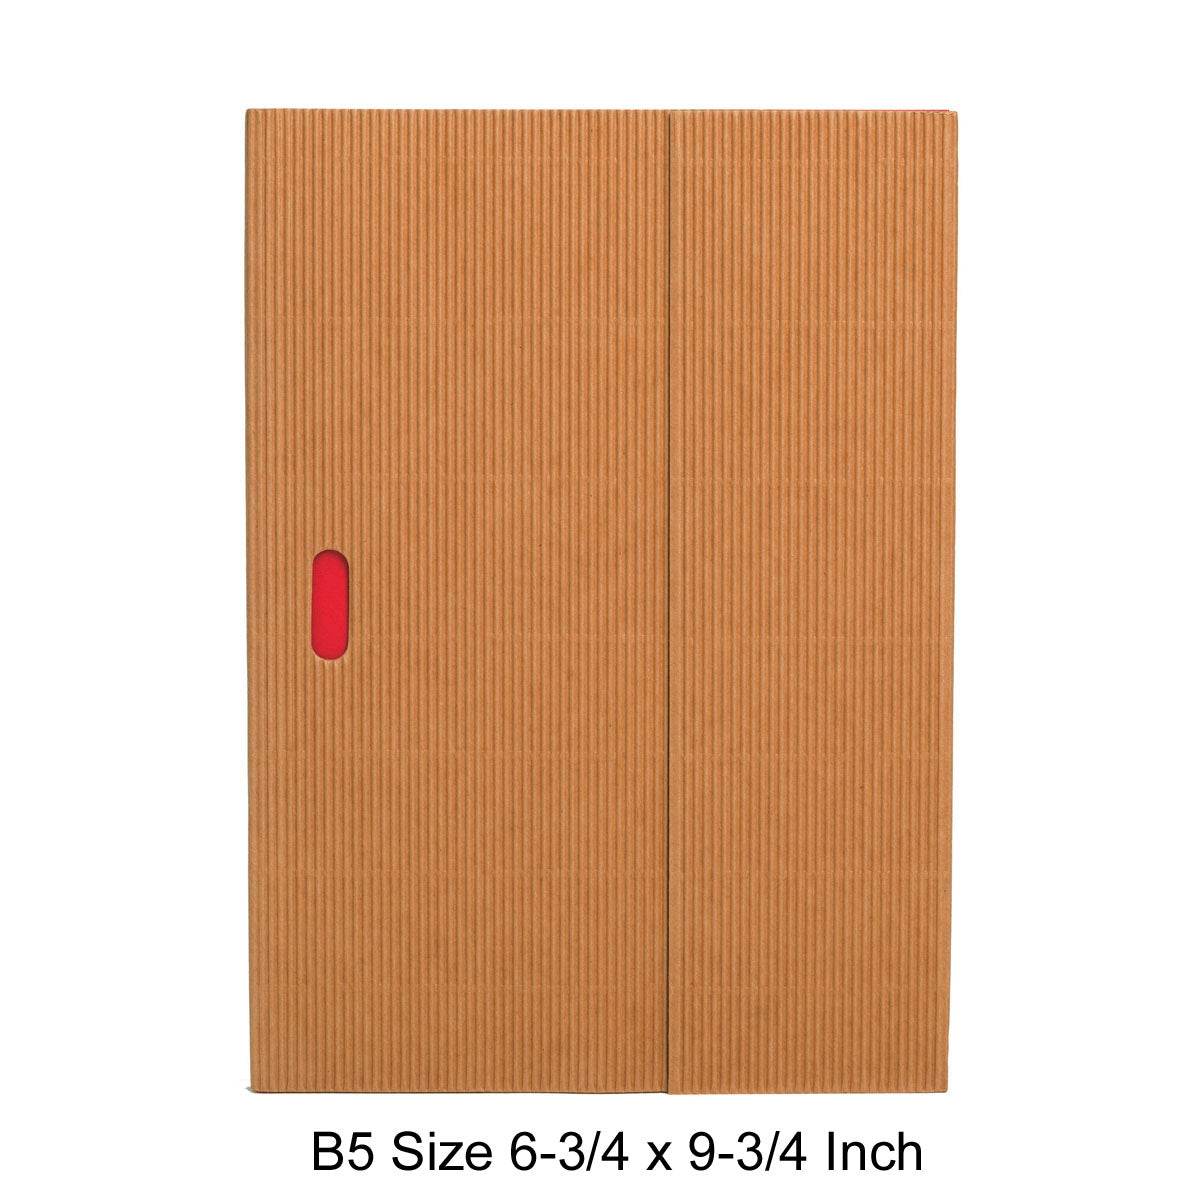 Paper-Oh Ondulo Notebook B5 Size with Magnetic Wrap